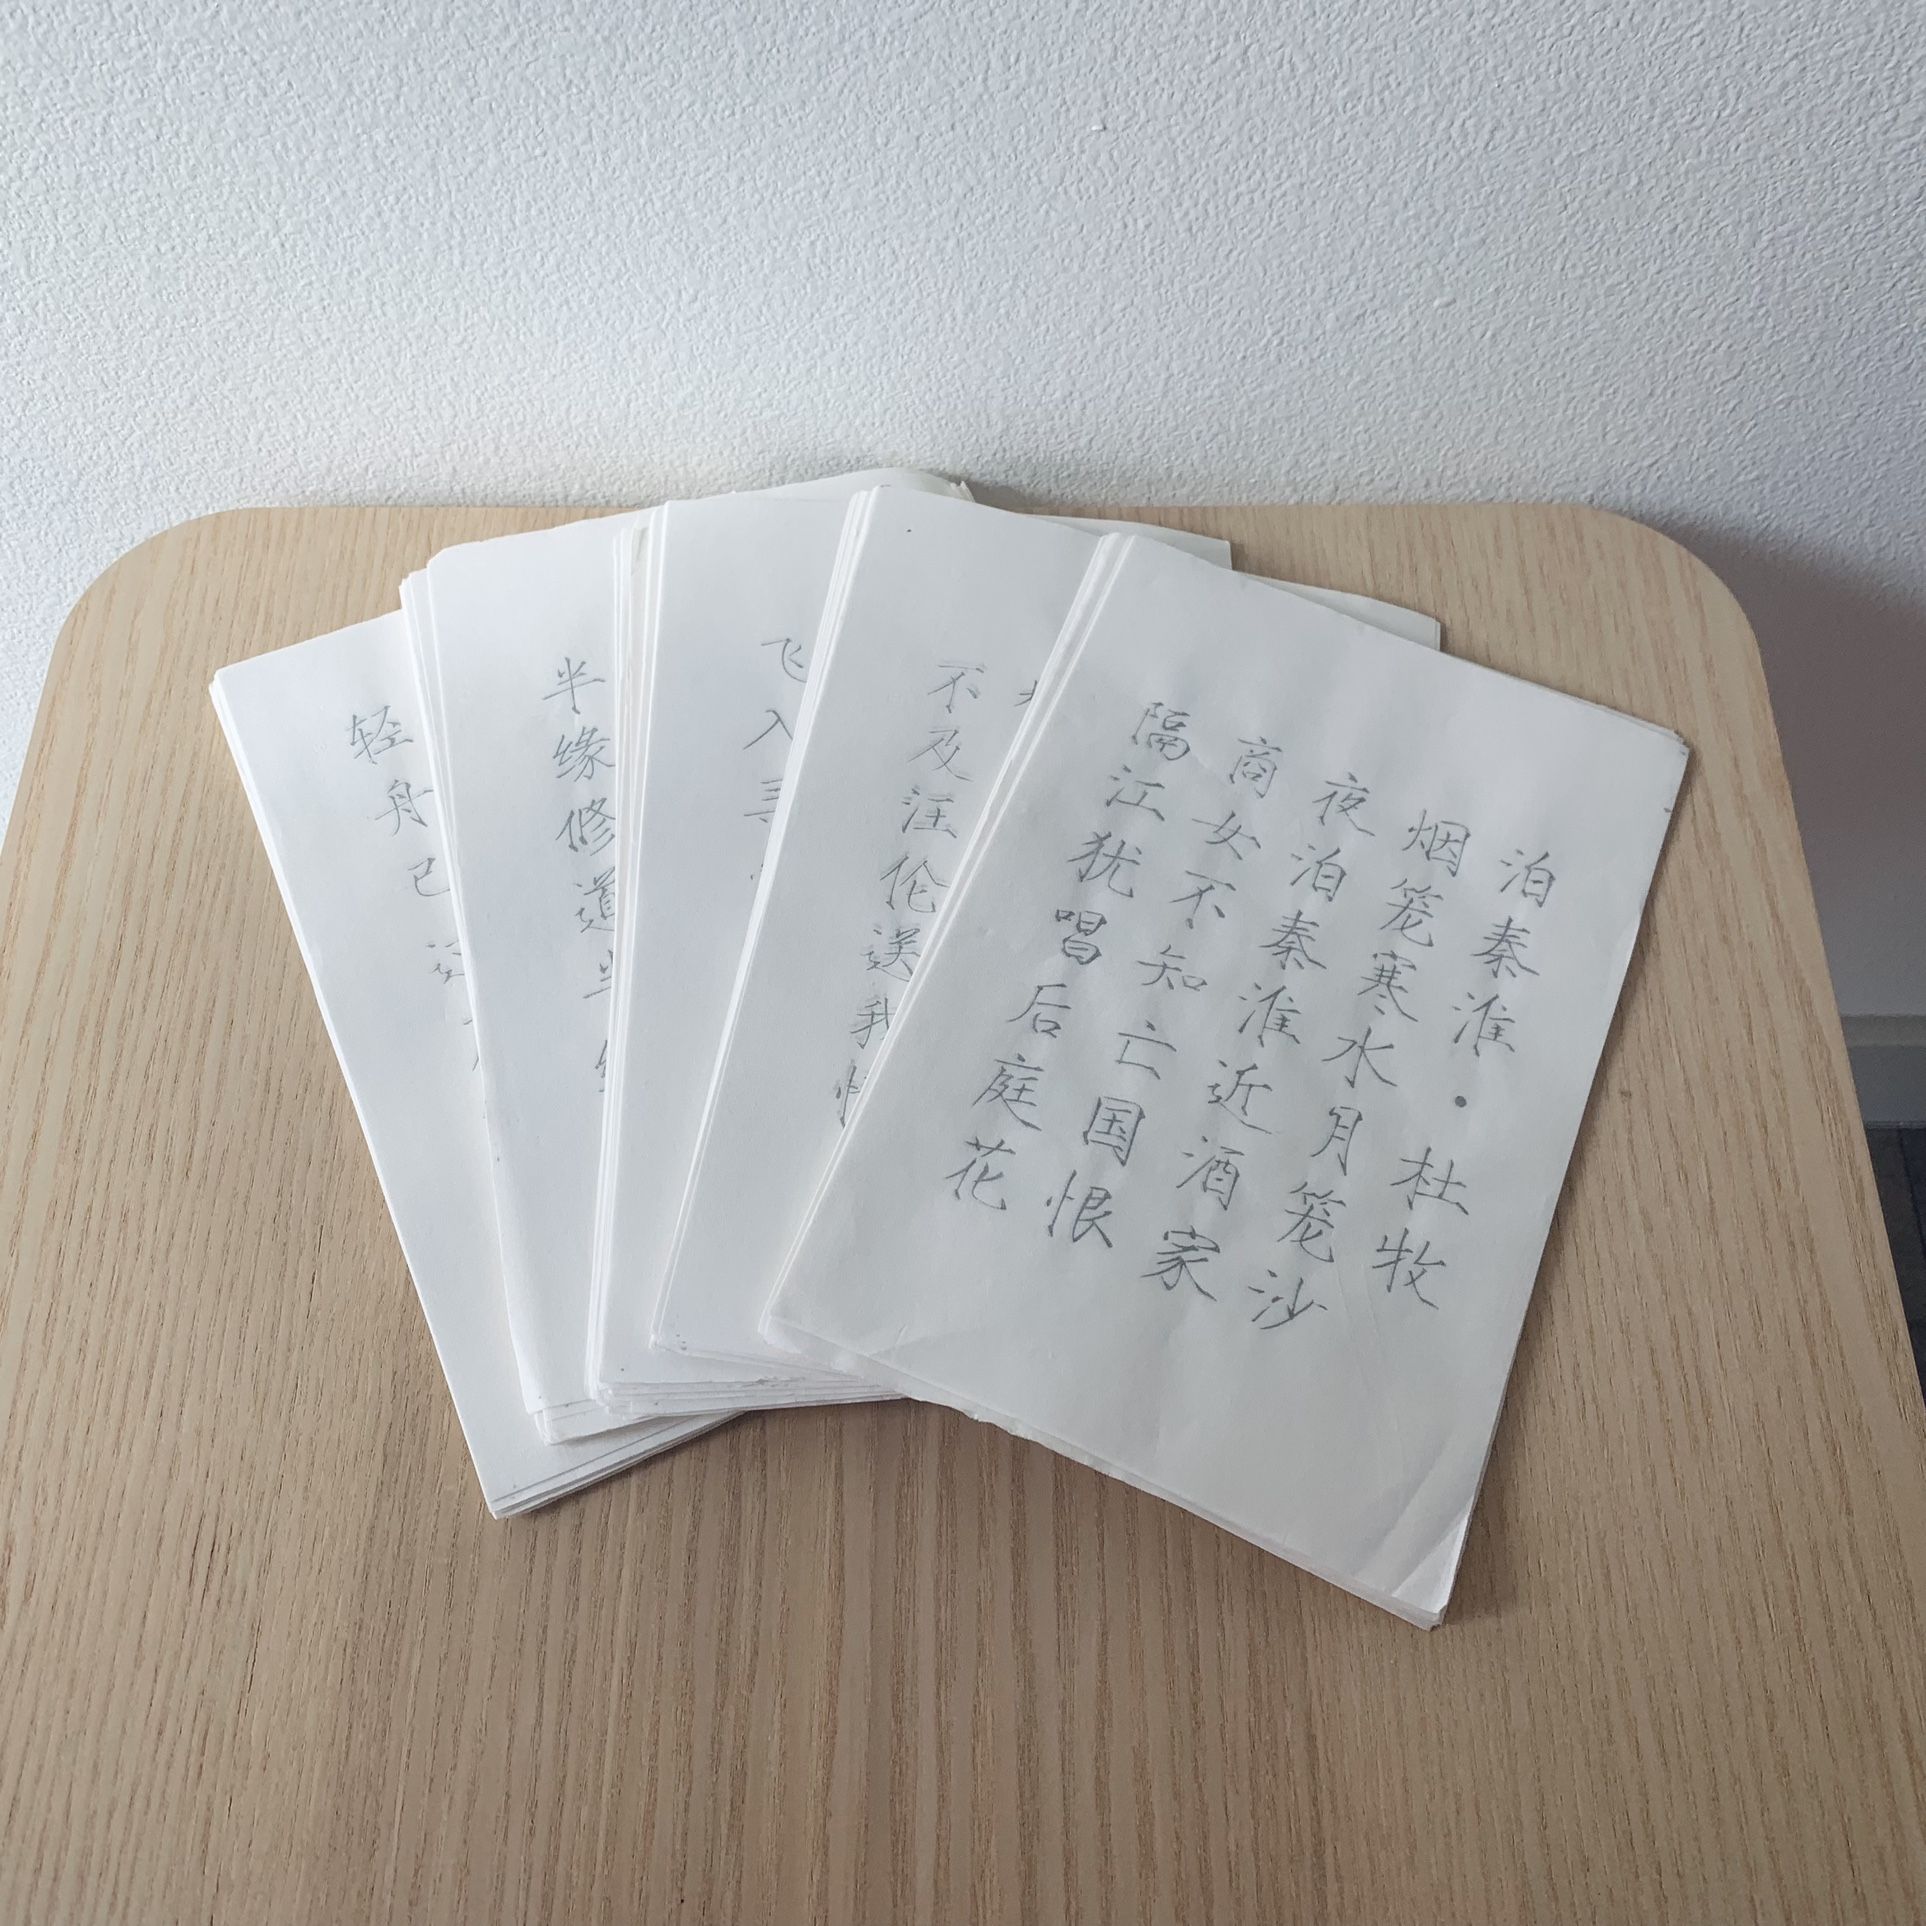 Chinese Calligraphy Practice Sheets 书法字帖